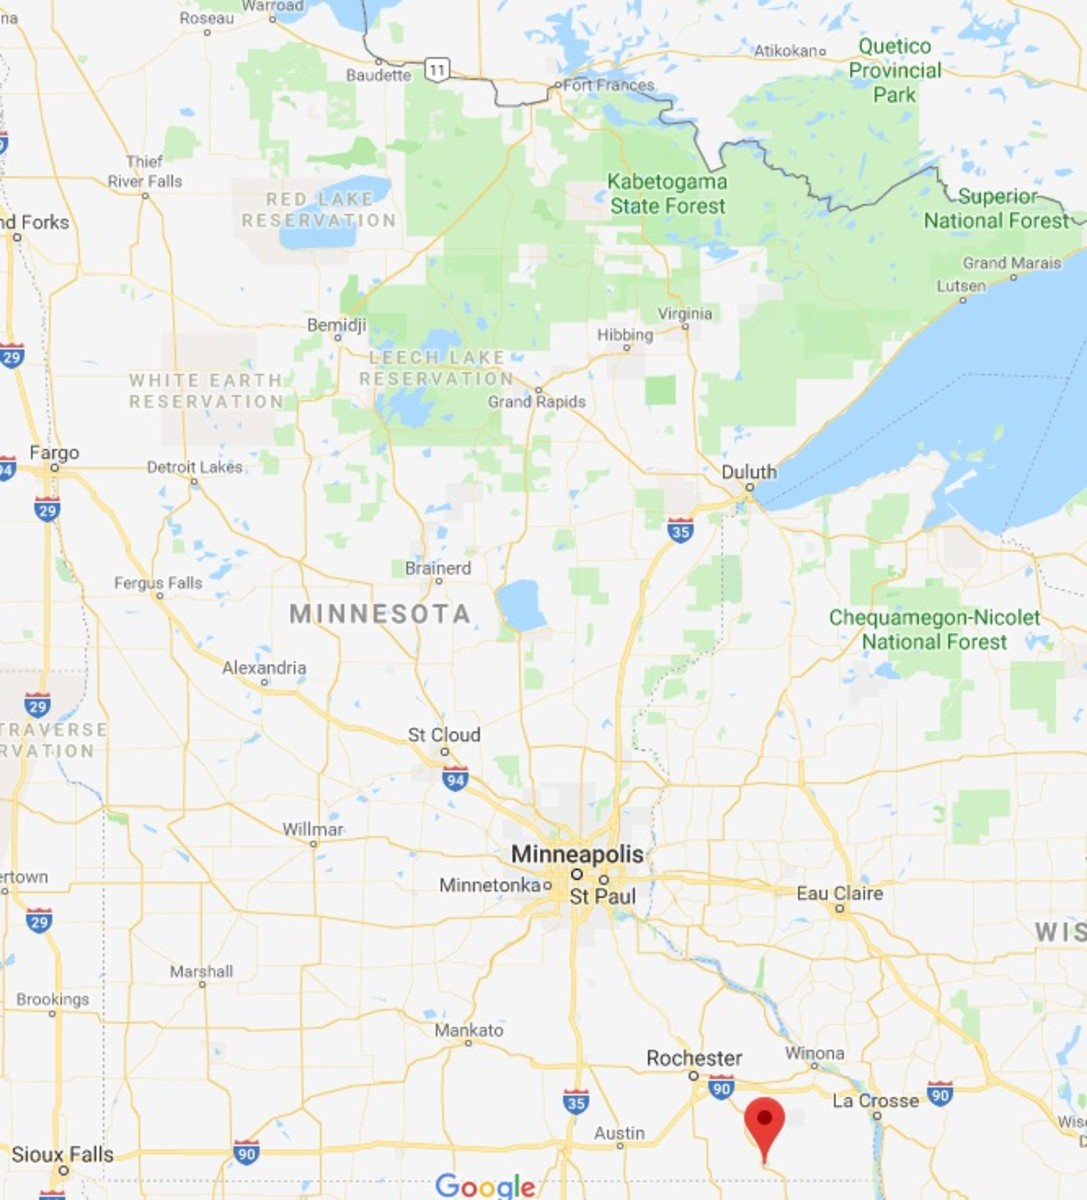 Harmony is located in Fillmore County in far southeast Minnesota. 